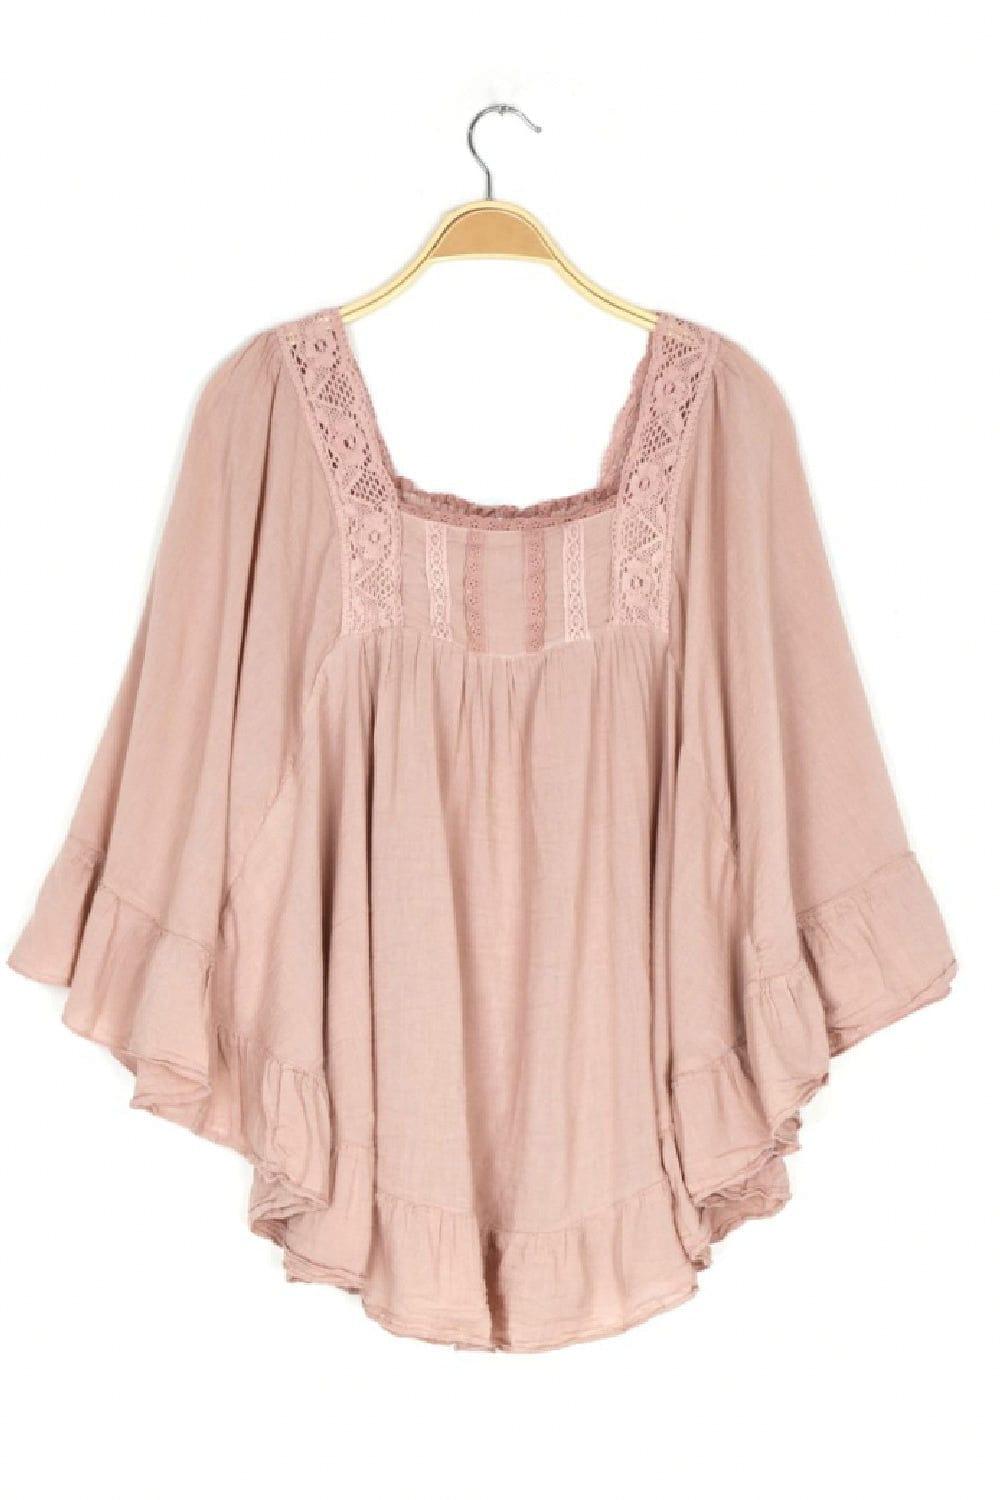 Soft ballet ping cotton blouse with detail and curved ruffle hemline handing on a hanger.